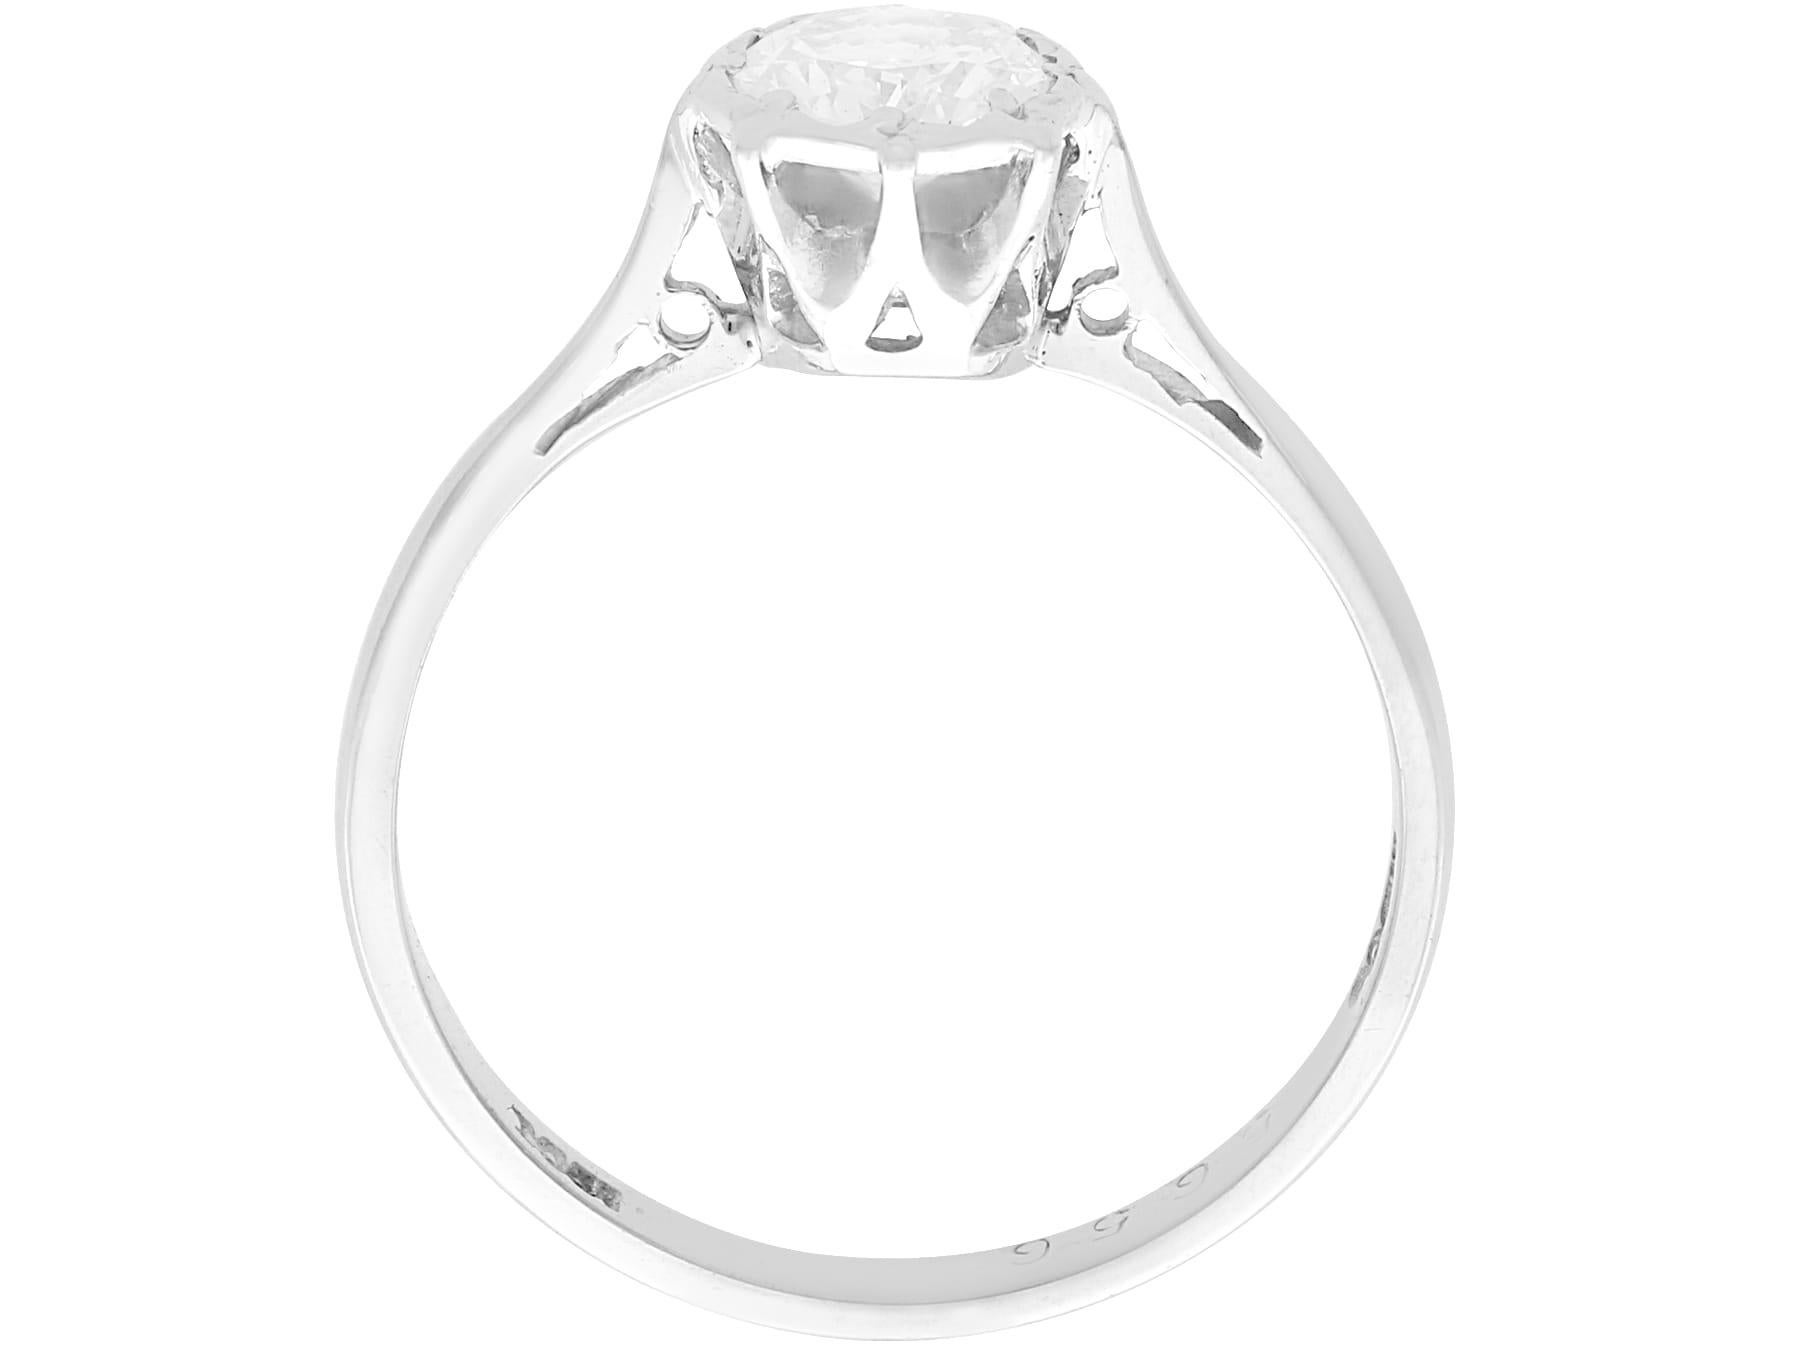 Women's or Men's Antique 0.59 Carat Diamond Solitaire Engagement Ring in 18k White Gold For Sale